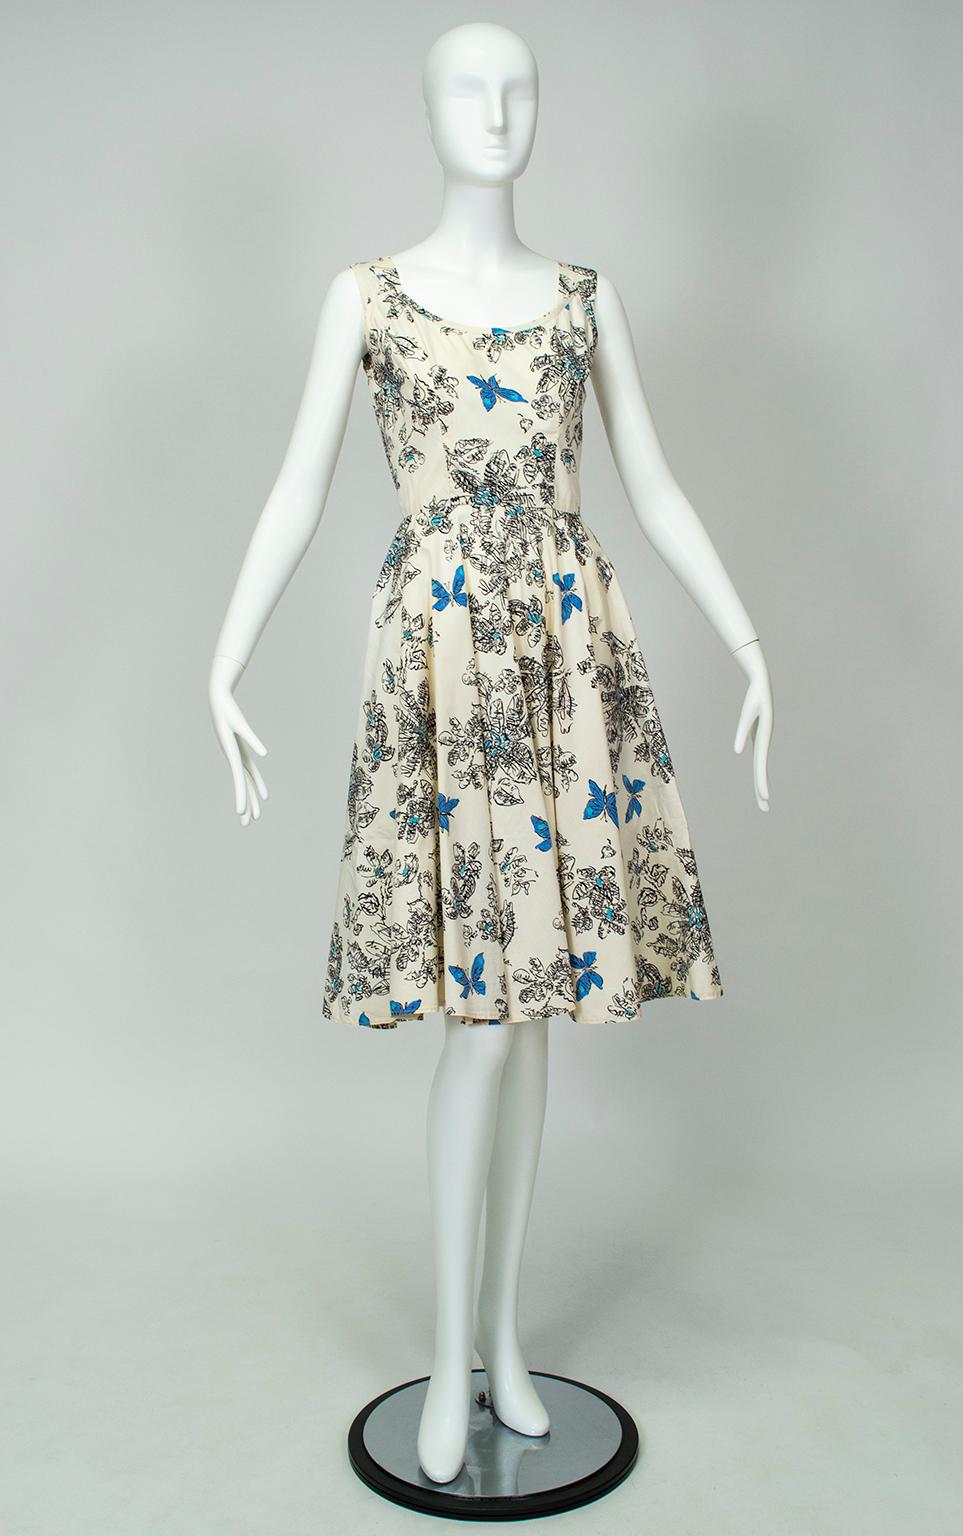 With a silhouette sweet enough for a music-box ballerina and a loose, Matisse-like butterfly sketch print, this singular party dress will be the center of attention at any gathering. The azure watercolor stain butterflies almost vibrate with